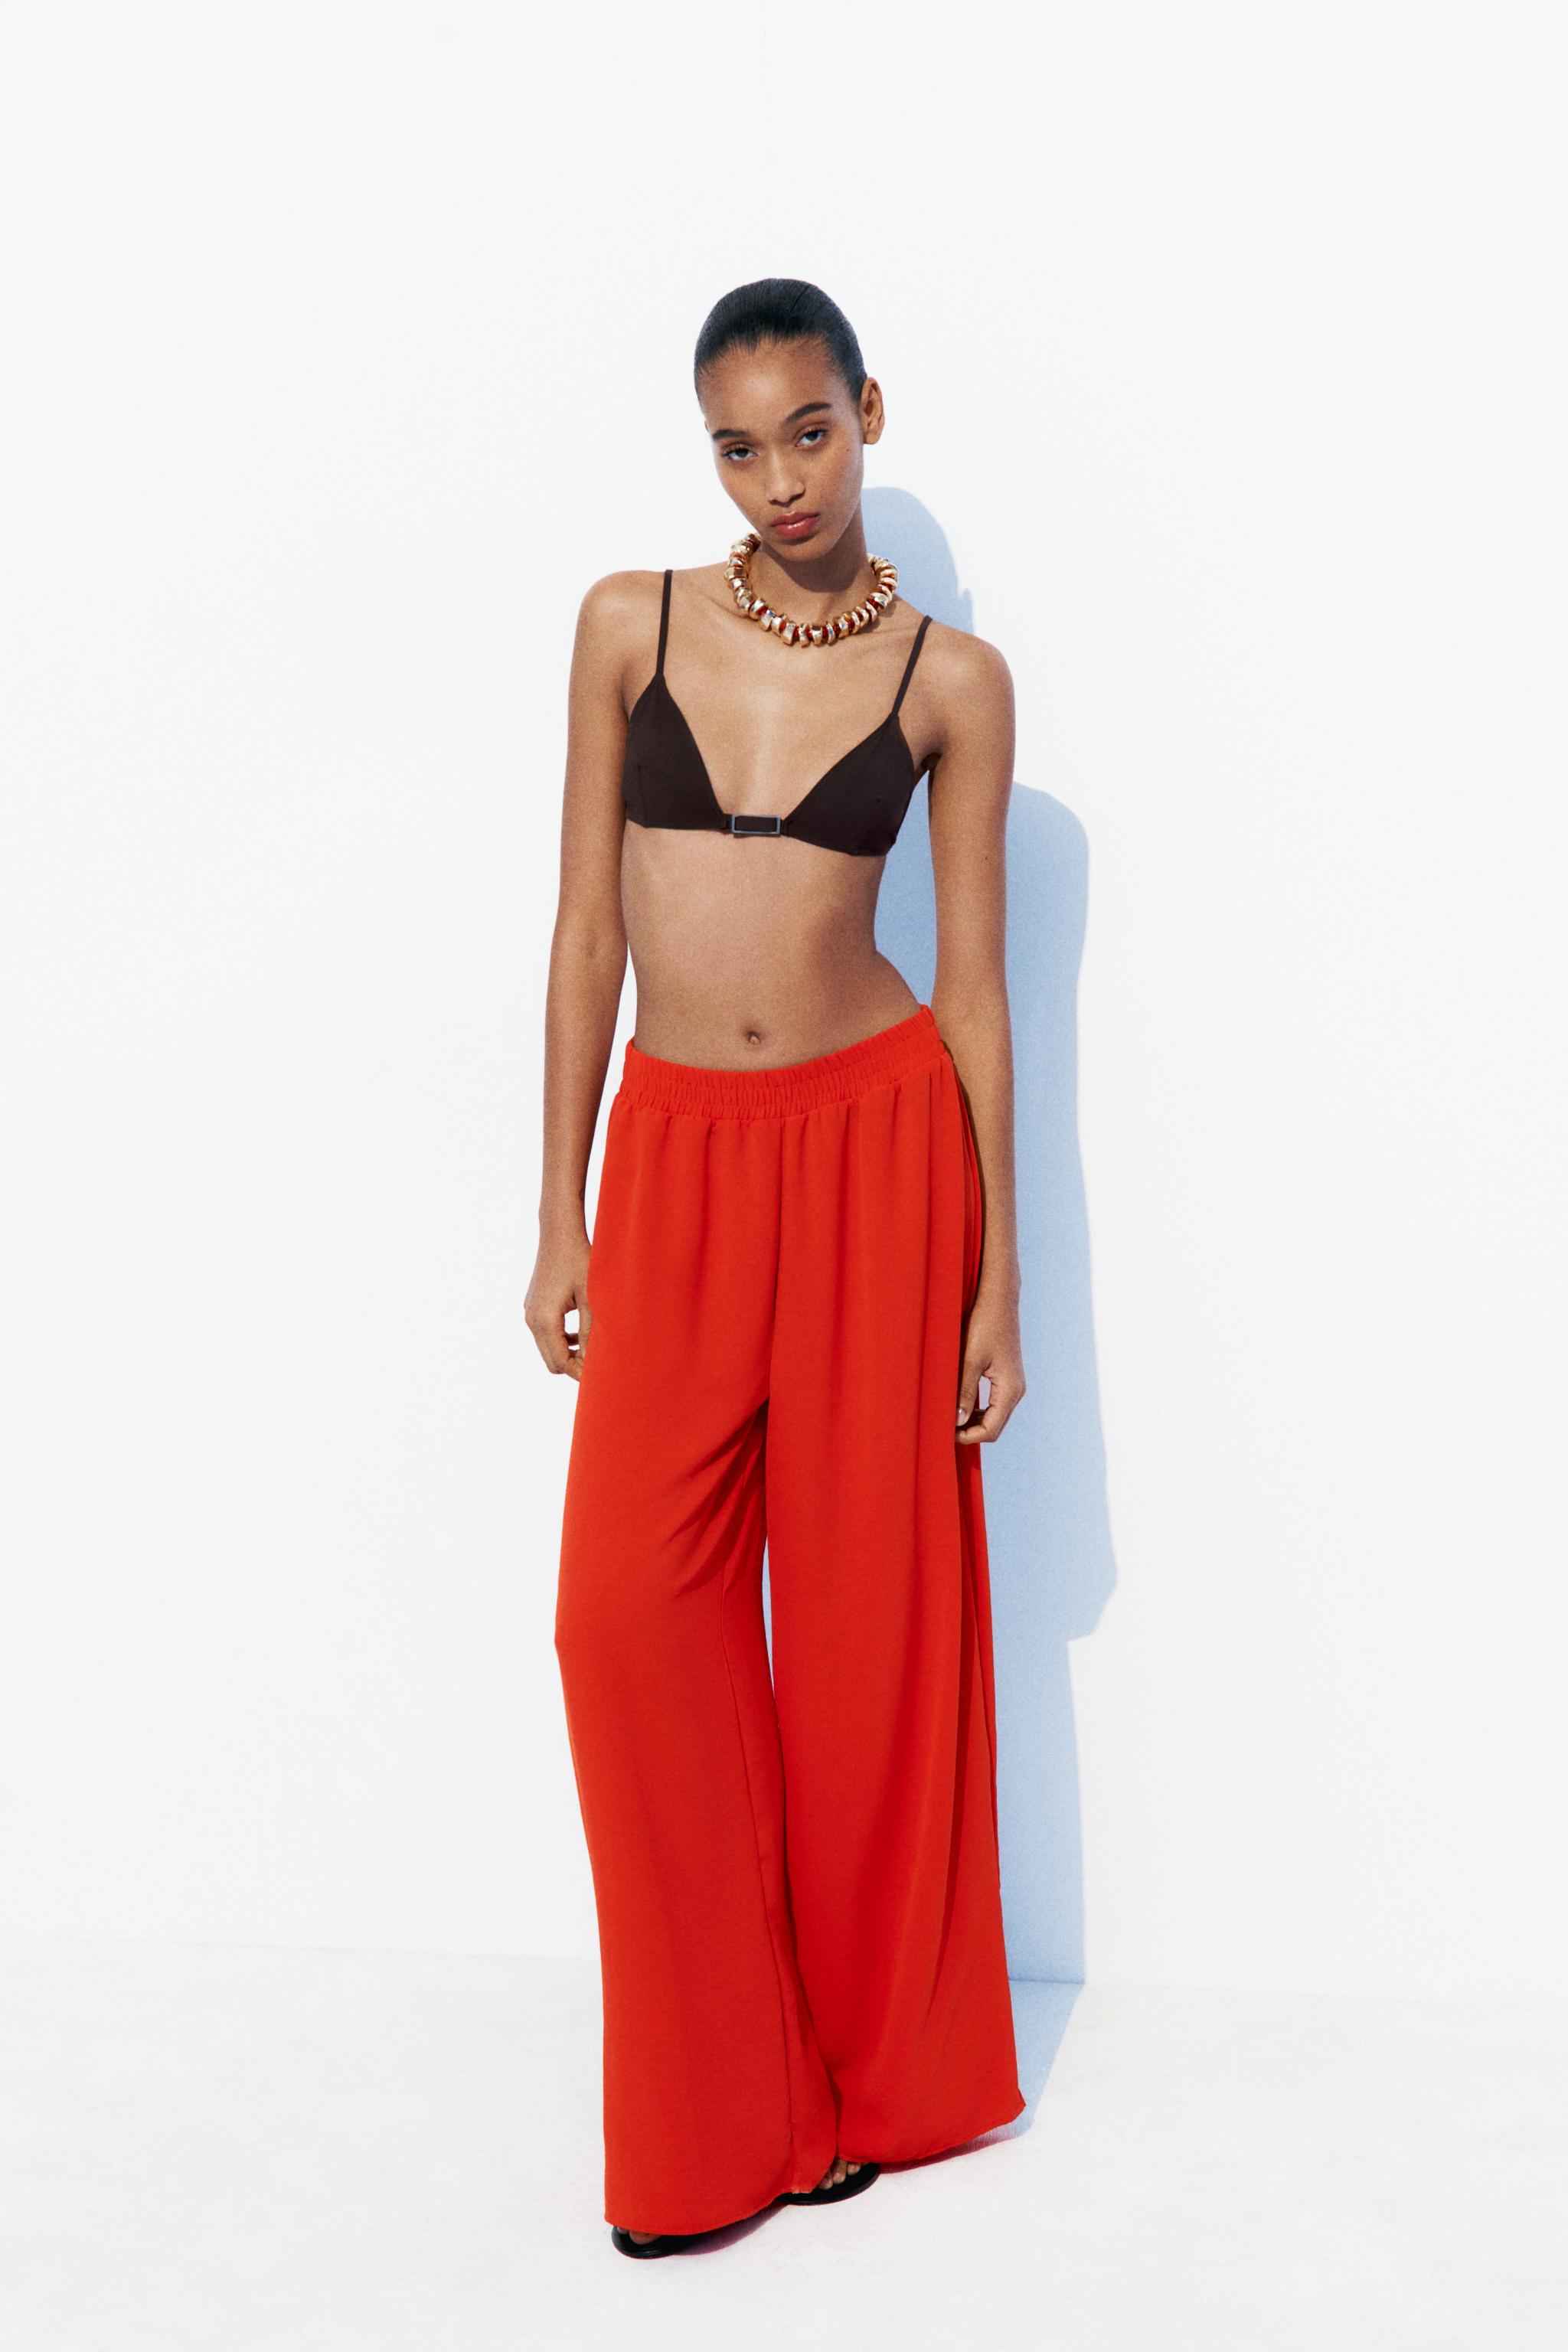 ZARA New Trousers Pants with double red side band Sold Out 7712/633 XS S  SMALL